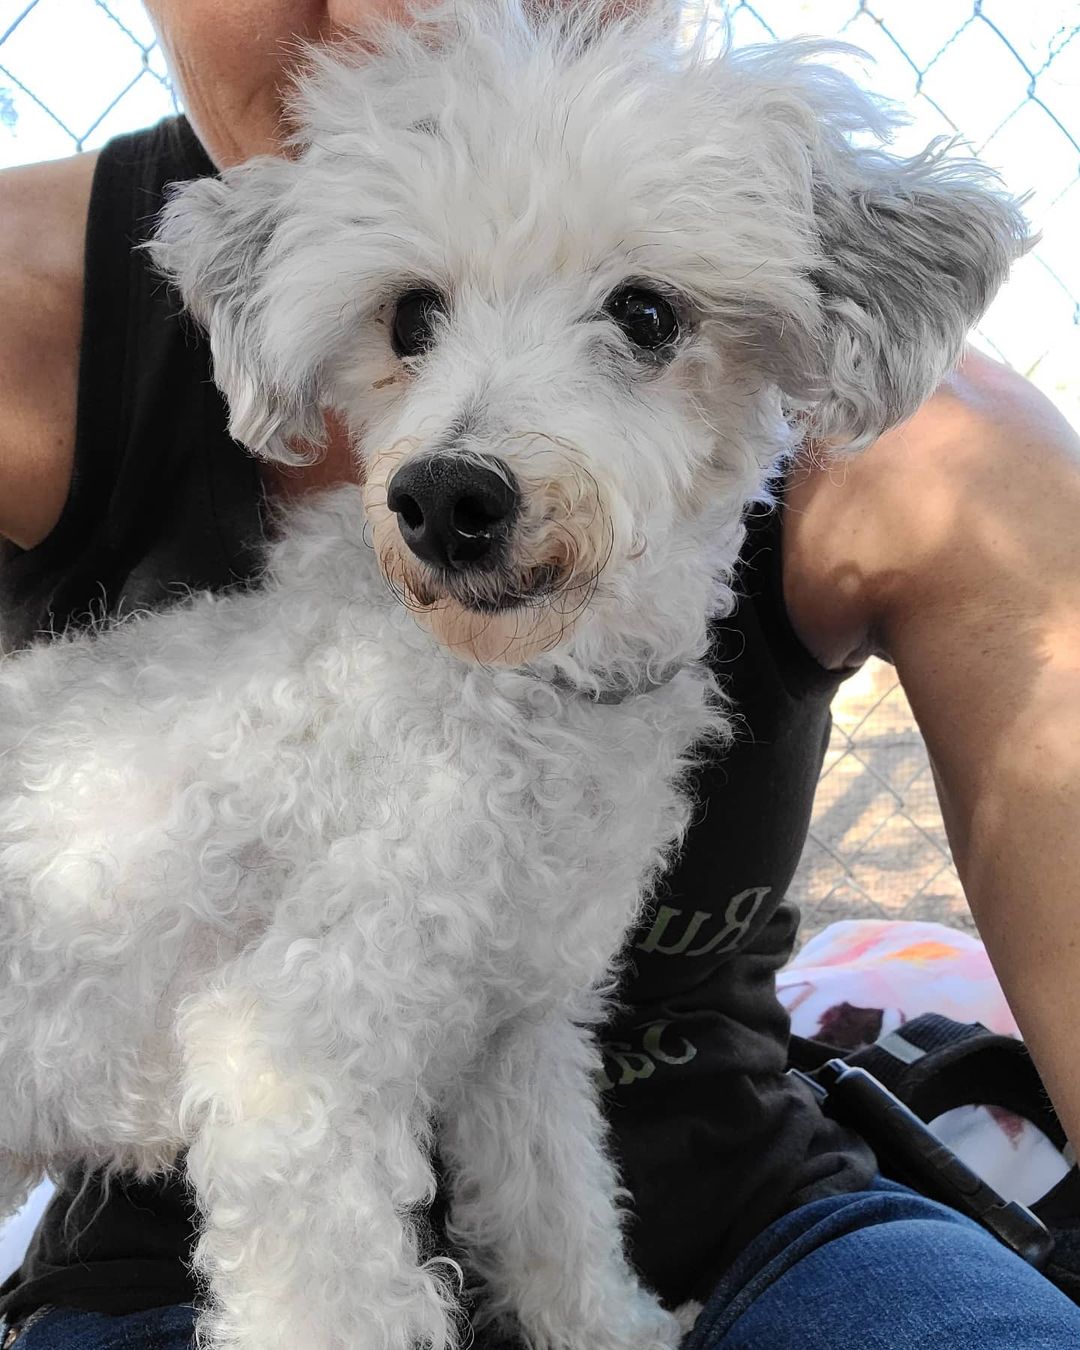 Today was a big day!!! Why you ask?!?! Because we rescued Rusty's Angel # 300!!!!! And let me tell you he's a cutie patootie!!!

This is 11-13 year old Manny. His story is sad and heartbreaking as his life, until now, was used for greed. He was owned by a breeder in Mesa. A year ago she sold him to a woman who thought she was buying a young poodle. The breeder lied and sold her a senior, debarked, unneutered dog with only 3 teeth.
Sadly with no experience owning dogs and especially no experience owning senior dogs she found herself in over her head. But thankfully she found us. 

Manny is amazing and once he is neutered he will be the perfect dog, literally! I mean just look at him!!!! 

We are confident we will have no trouble finding his perfect match that will give him the life he should have had all along. 
If your interested, get your adoption application in early because we know this handsome boy won't be here long. 

Welcome home Manny. This is where you start living your best life.

❤🐾❤

Adoption application:
https://docs.google.com/forms/d/e/1FAIpQLSel9SLUQQKsDiDZys98l63VIWHF66WkleWSelF5s1FXNyd1AQ/viewform